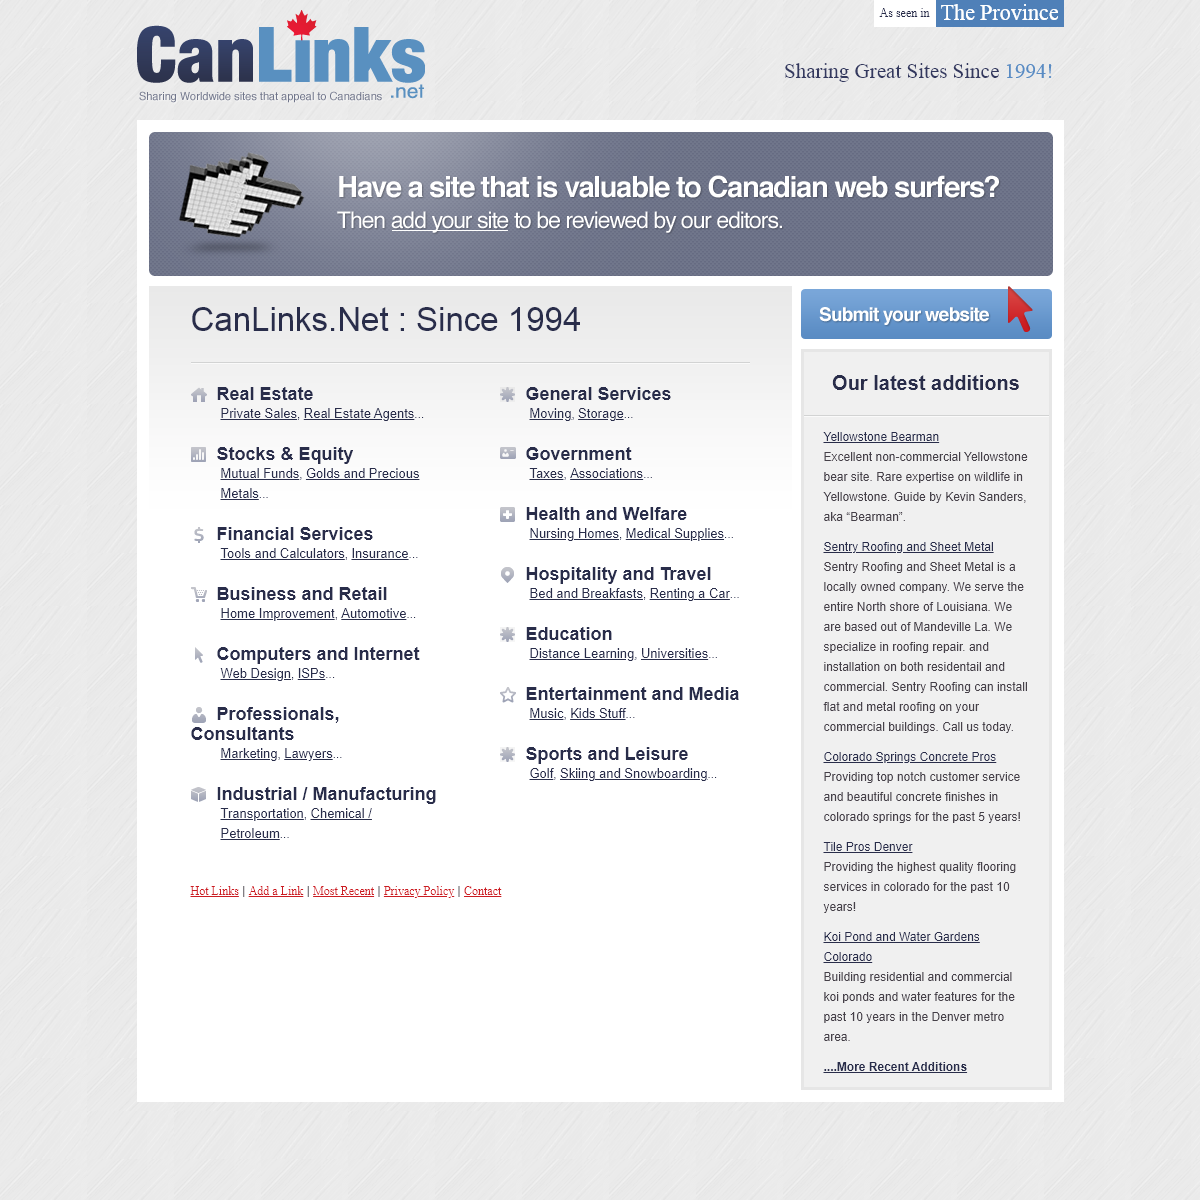 A complete backup of canlinks.net